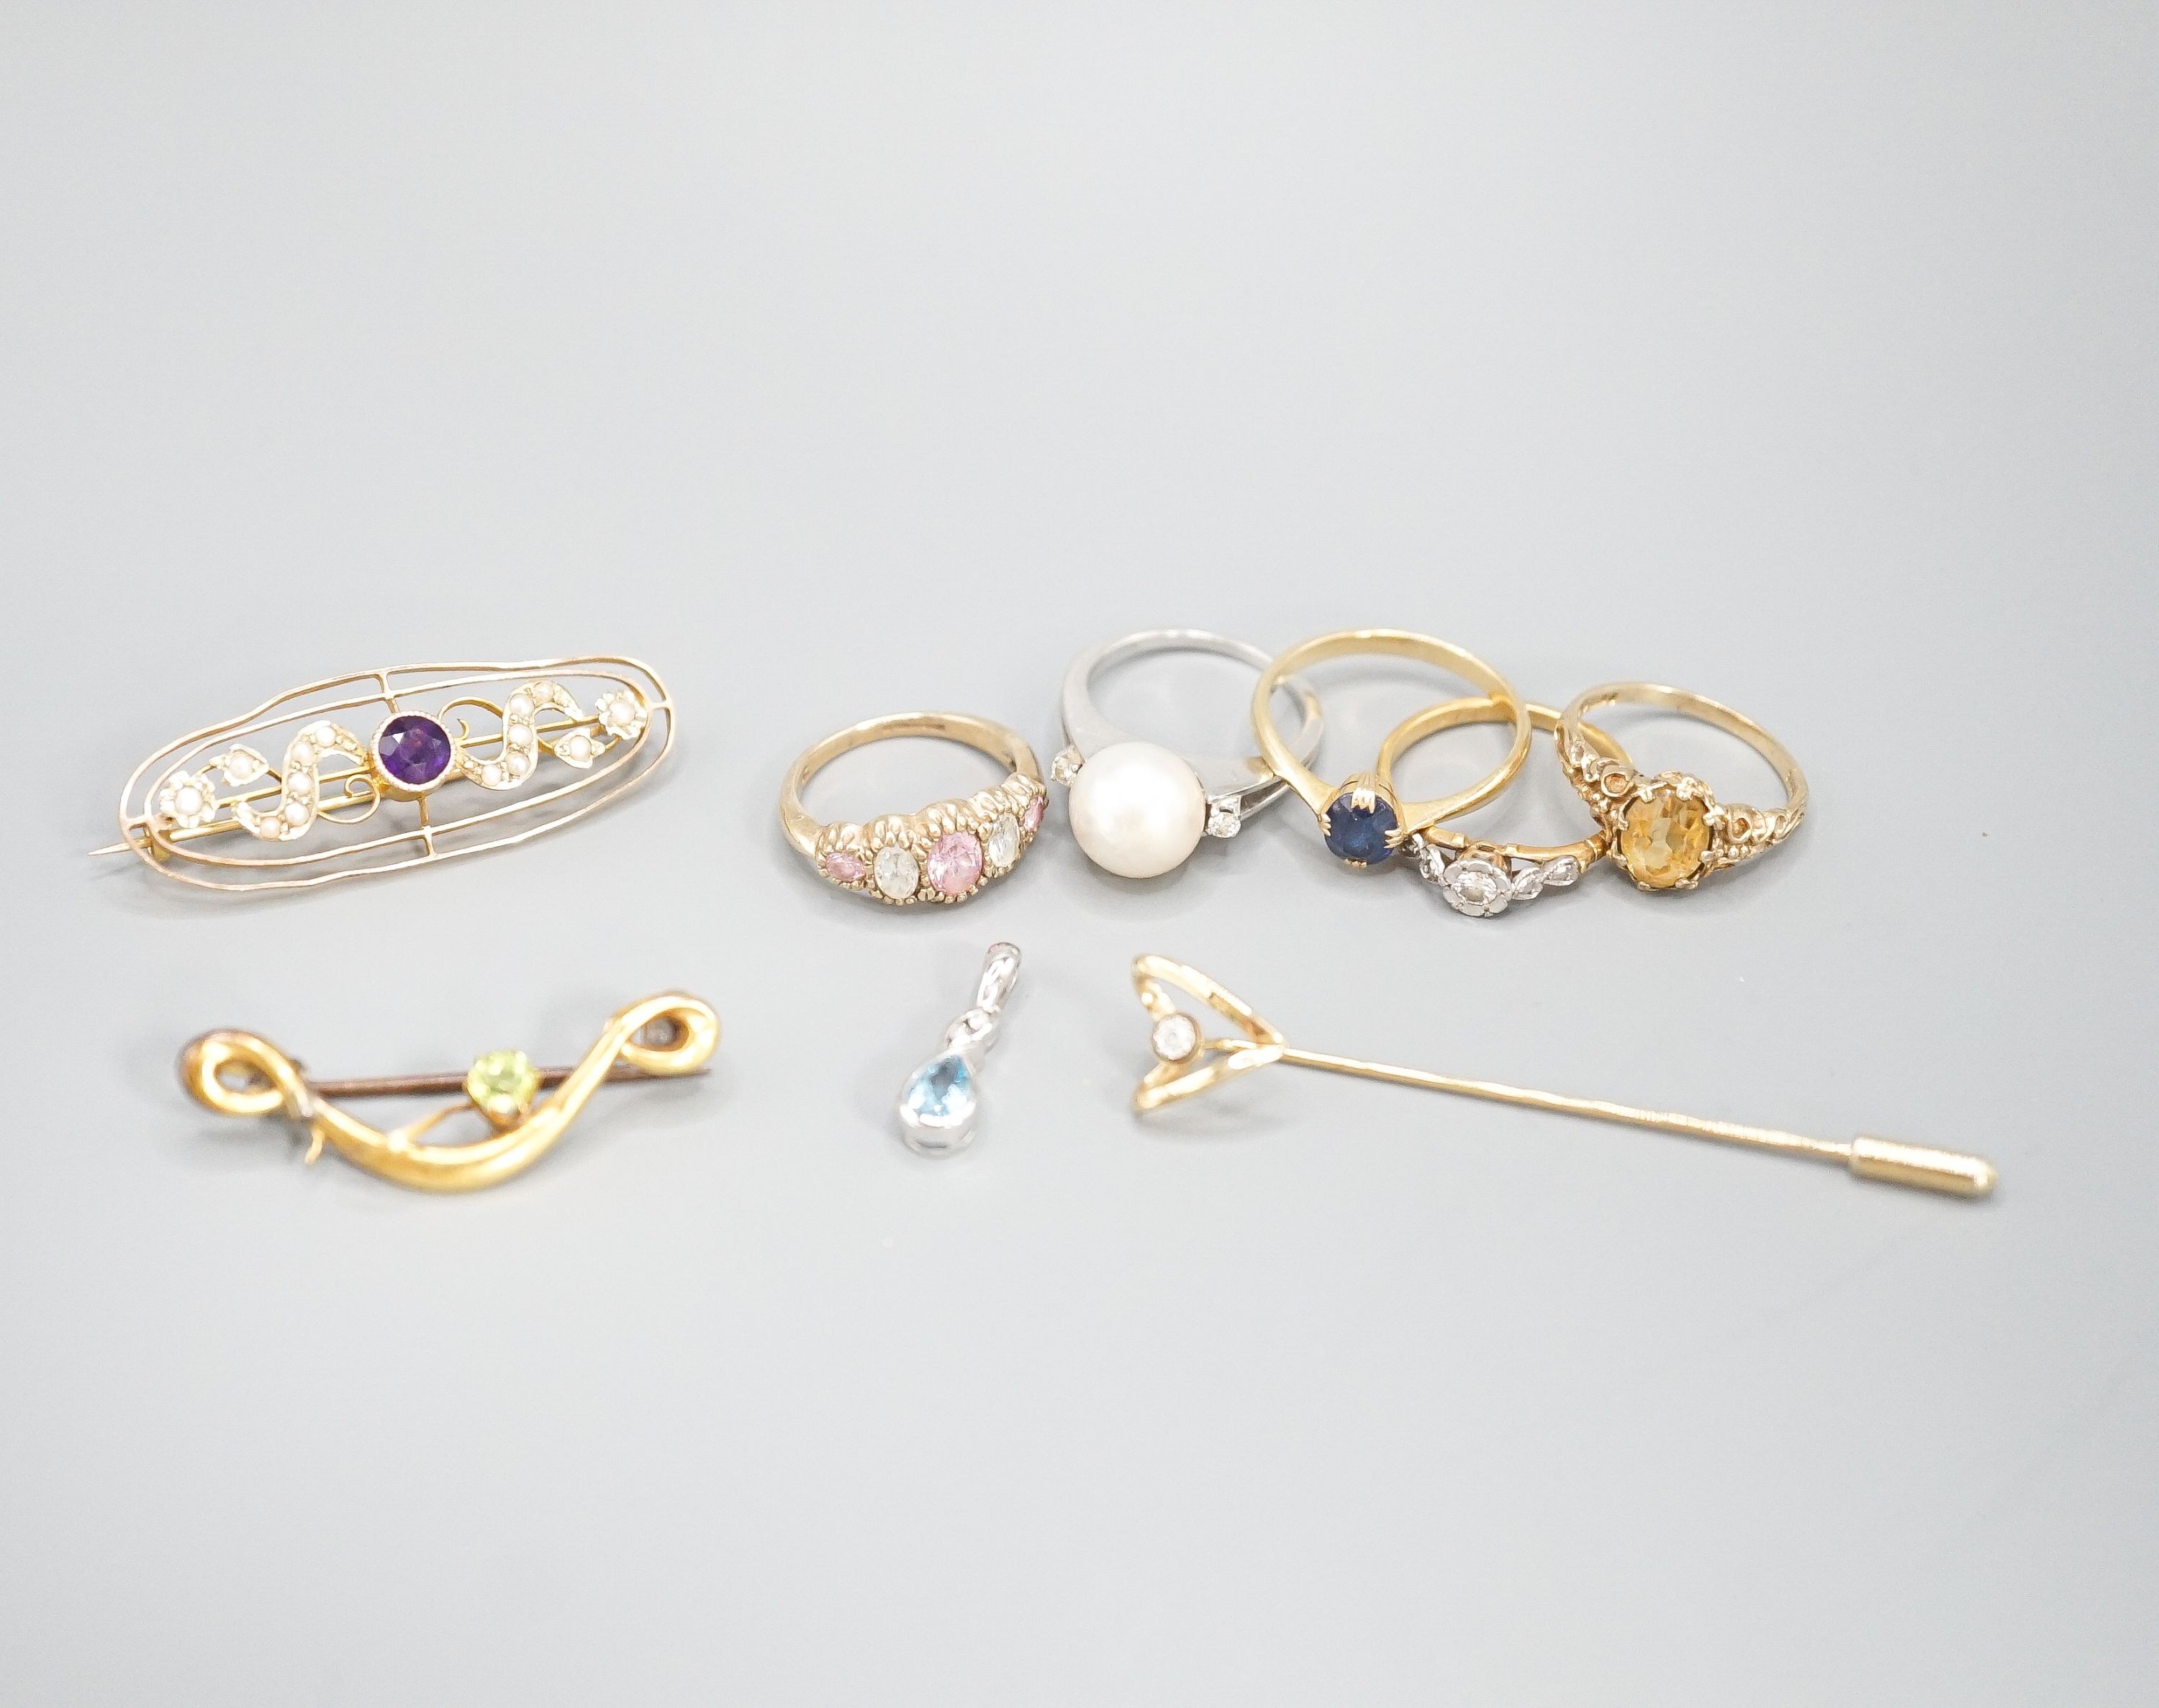 An 18ct and illusion set diamond ring, gross 2.4 grams, two 9ct gold and gem set rings, gross 4.8 grams, a yellow metal gem set ring and a white metal and cultured pearl ring (gross 6.4 grams) and four other items of jew